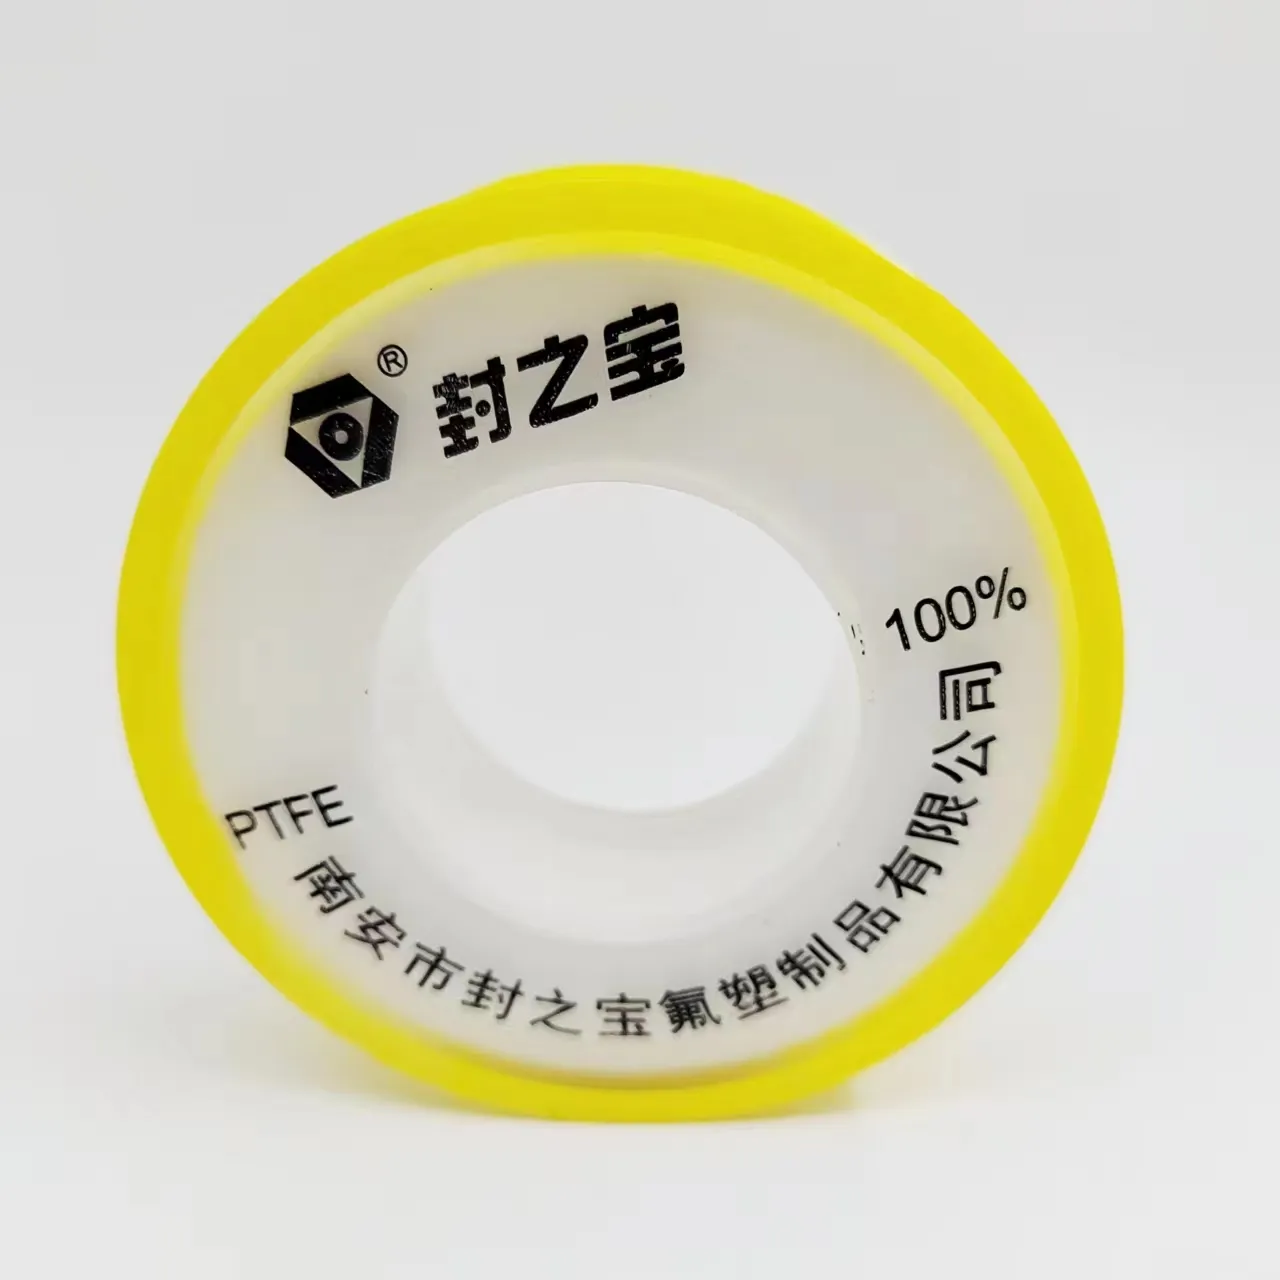 high temperature tape oil o-ring teflonning tape factory made in china PTFE thread seal tape